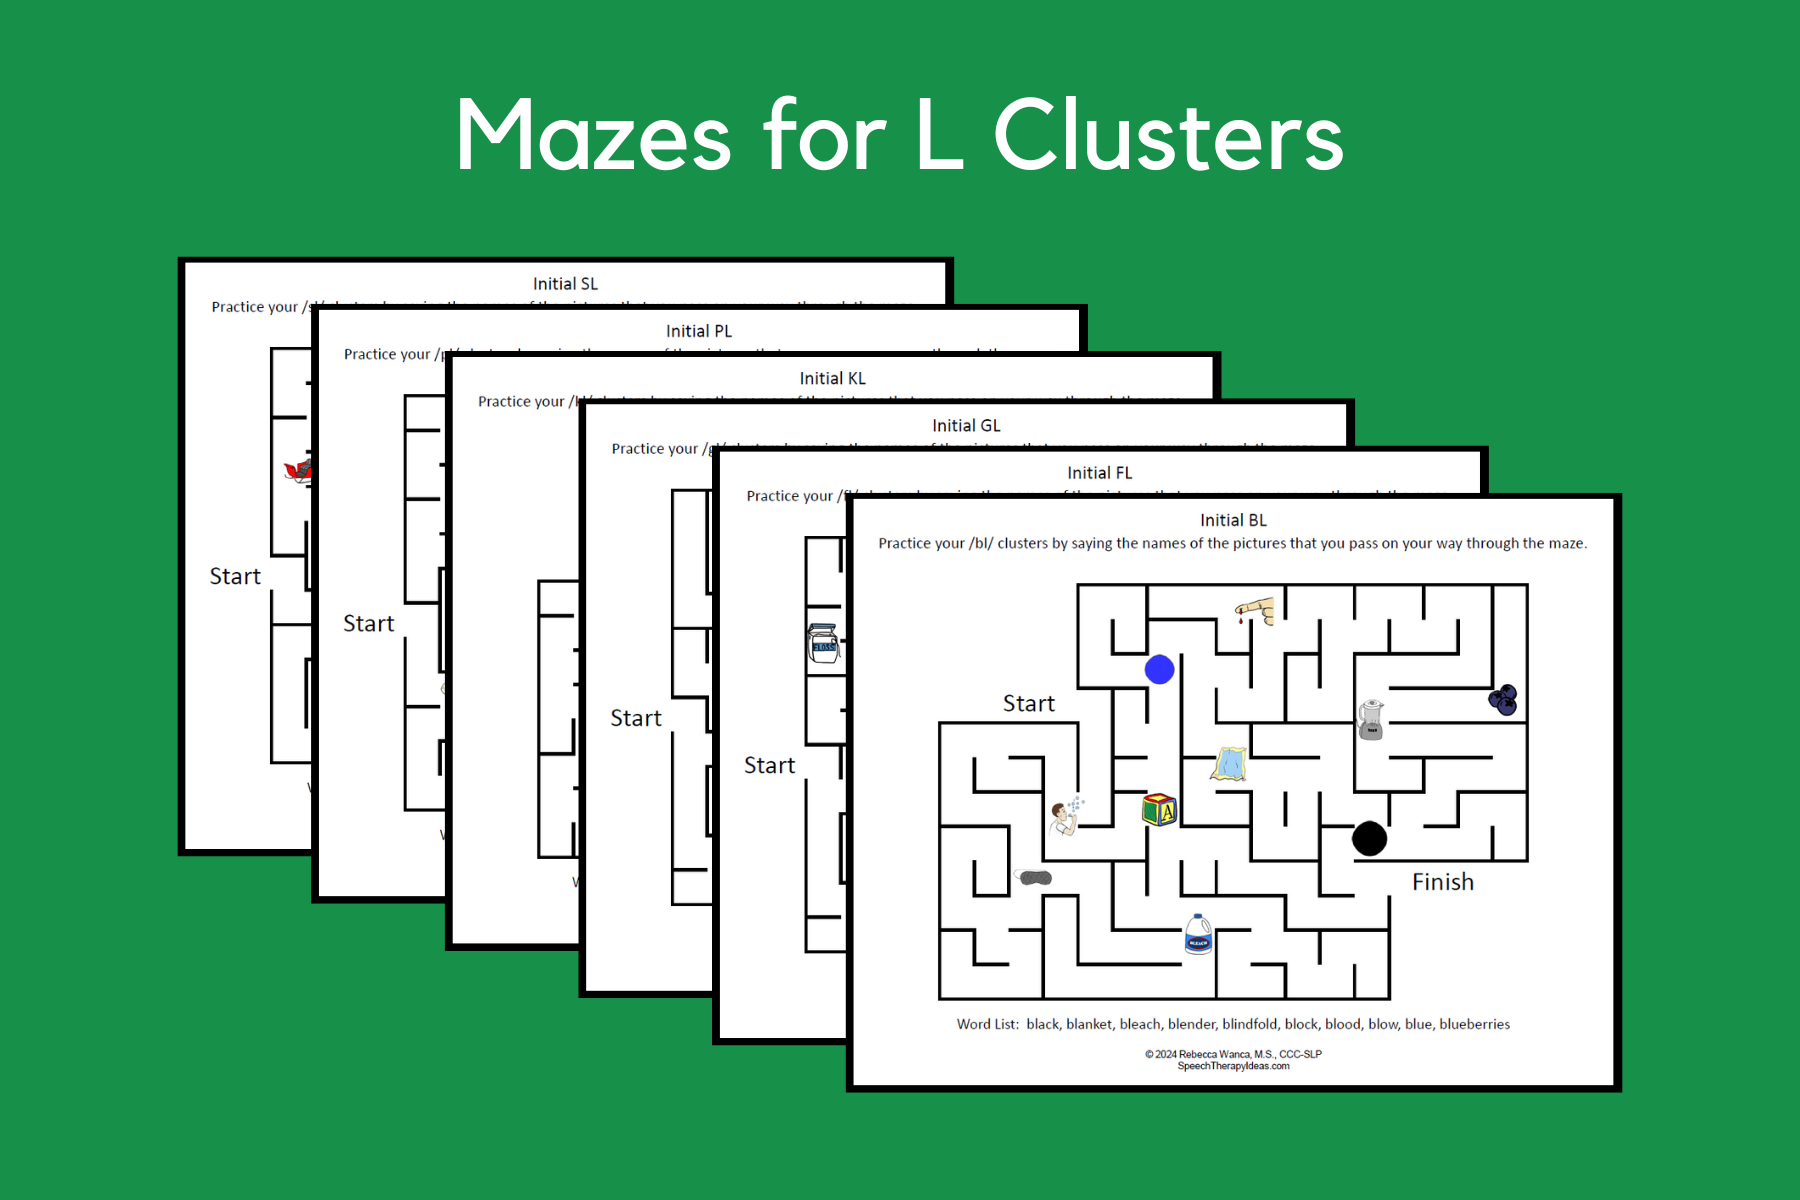 Mazes for L Clusters